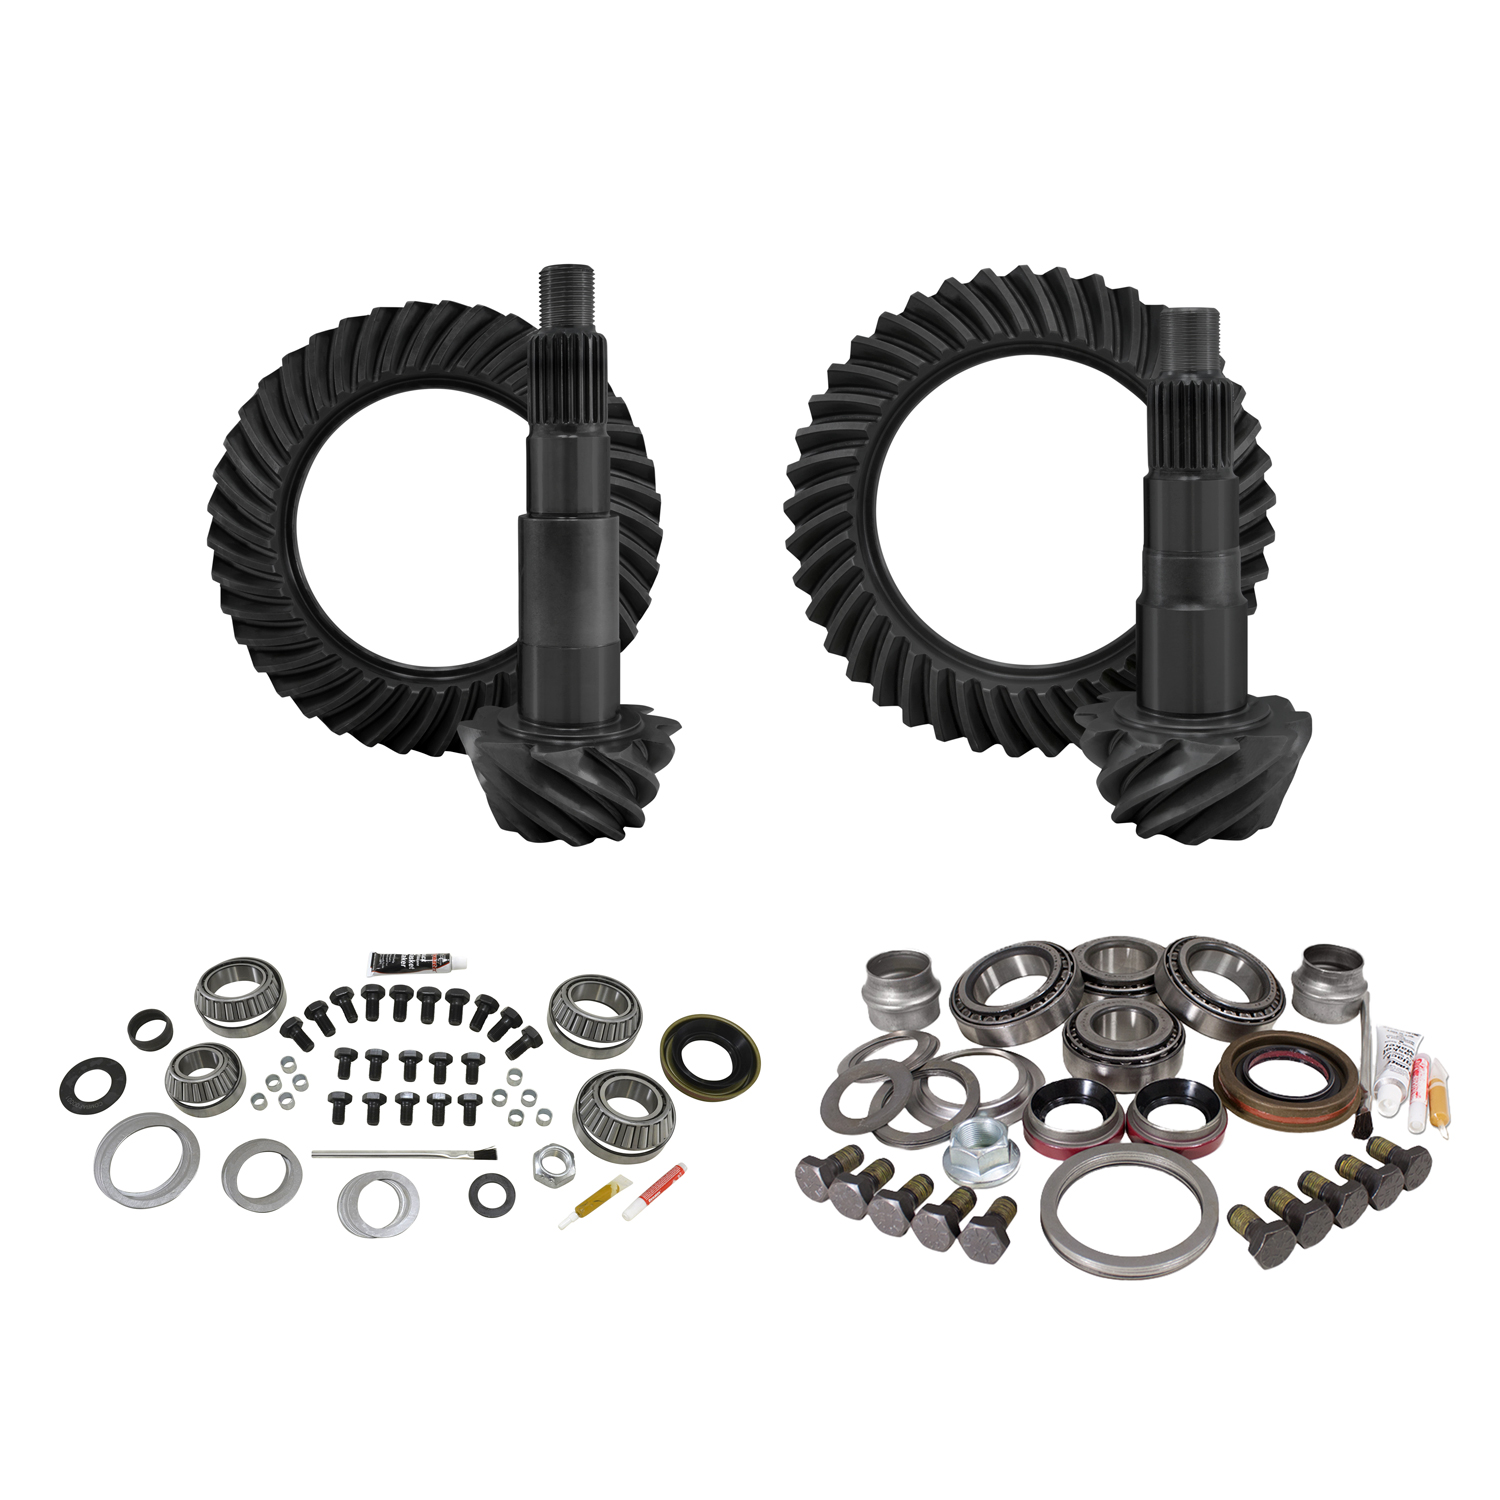 Yukon Gear YGK016 Differential Ring and Pinion Kit